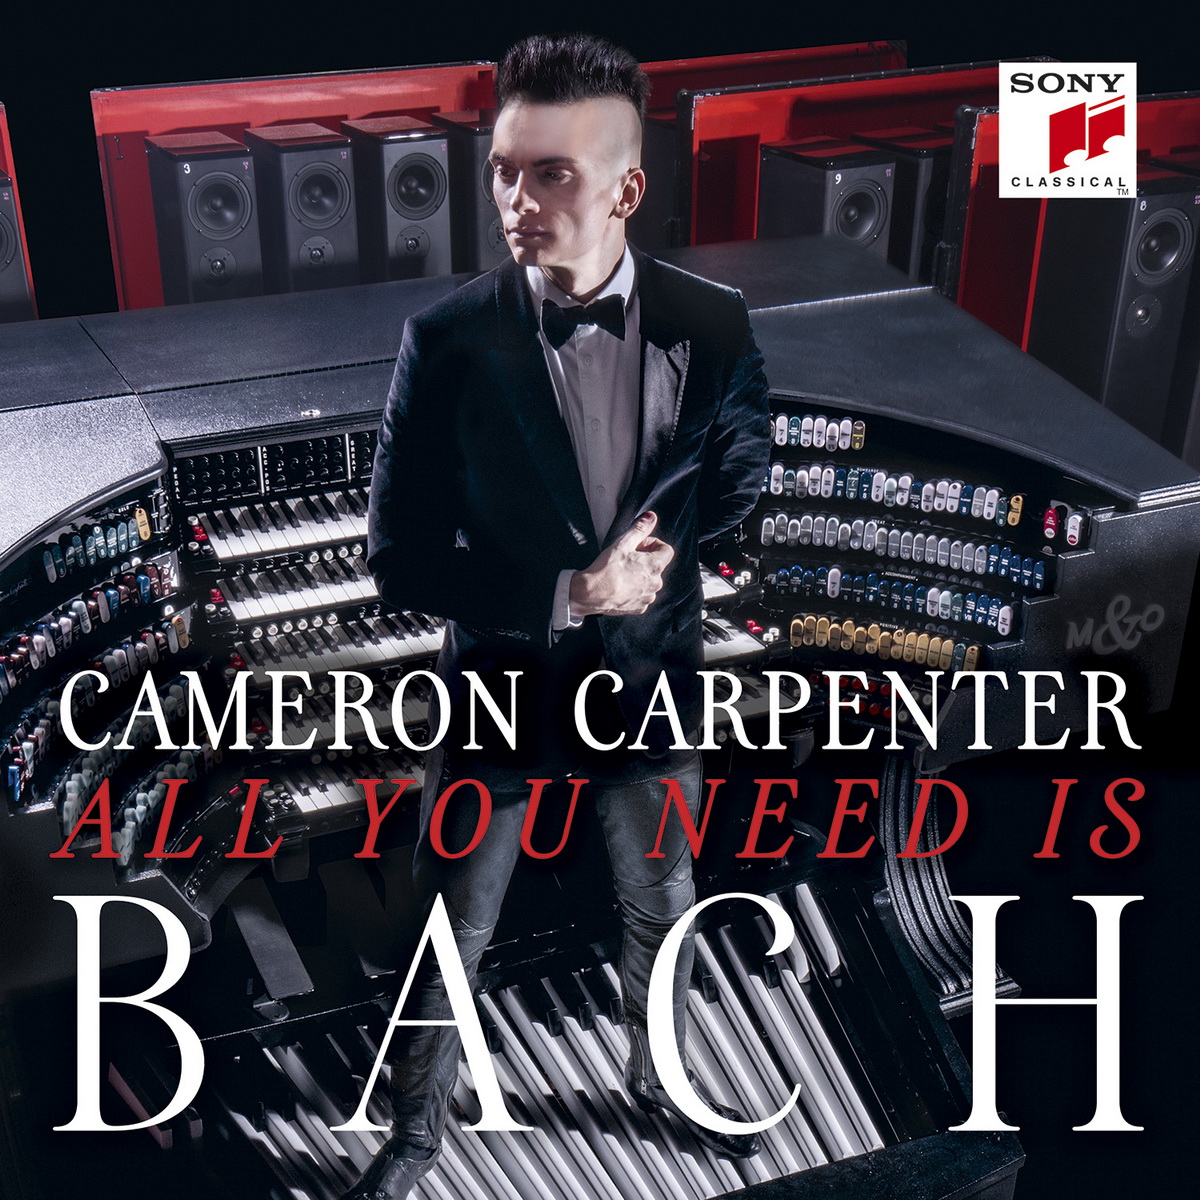 Cameron Carpenter - All You Need is Bach (2016) [FLAC 24bit/96kHz]